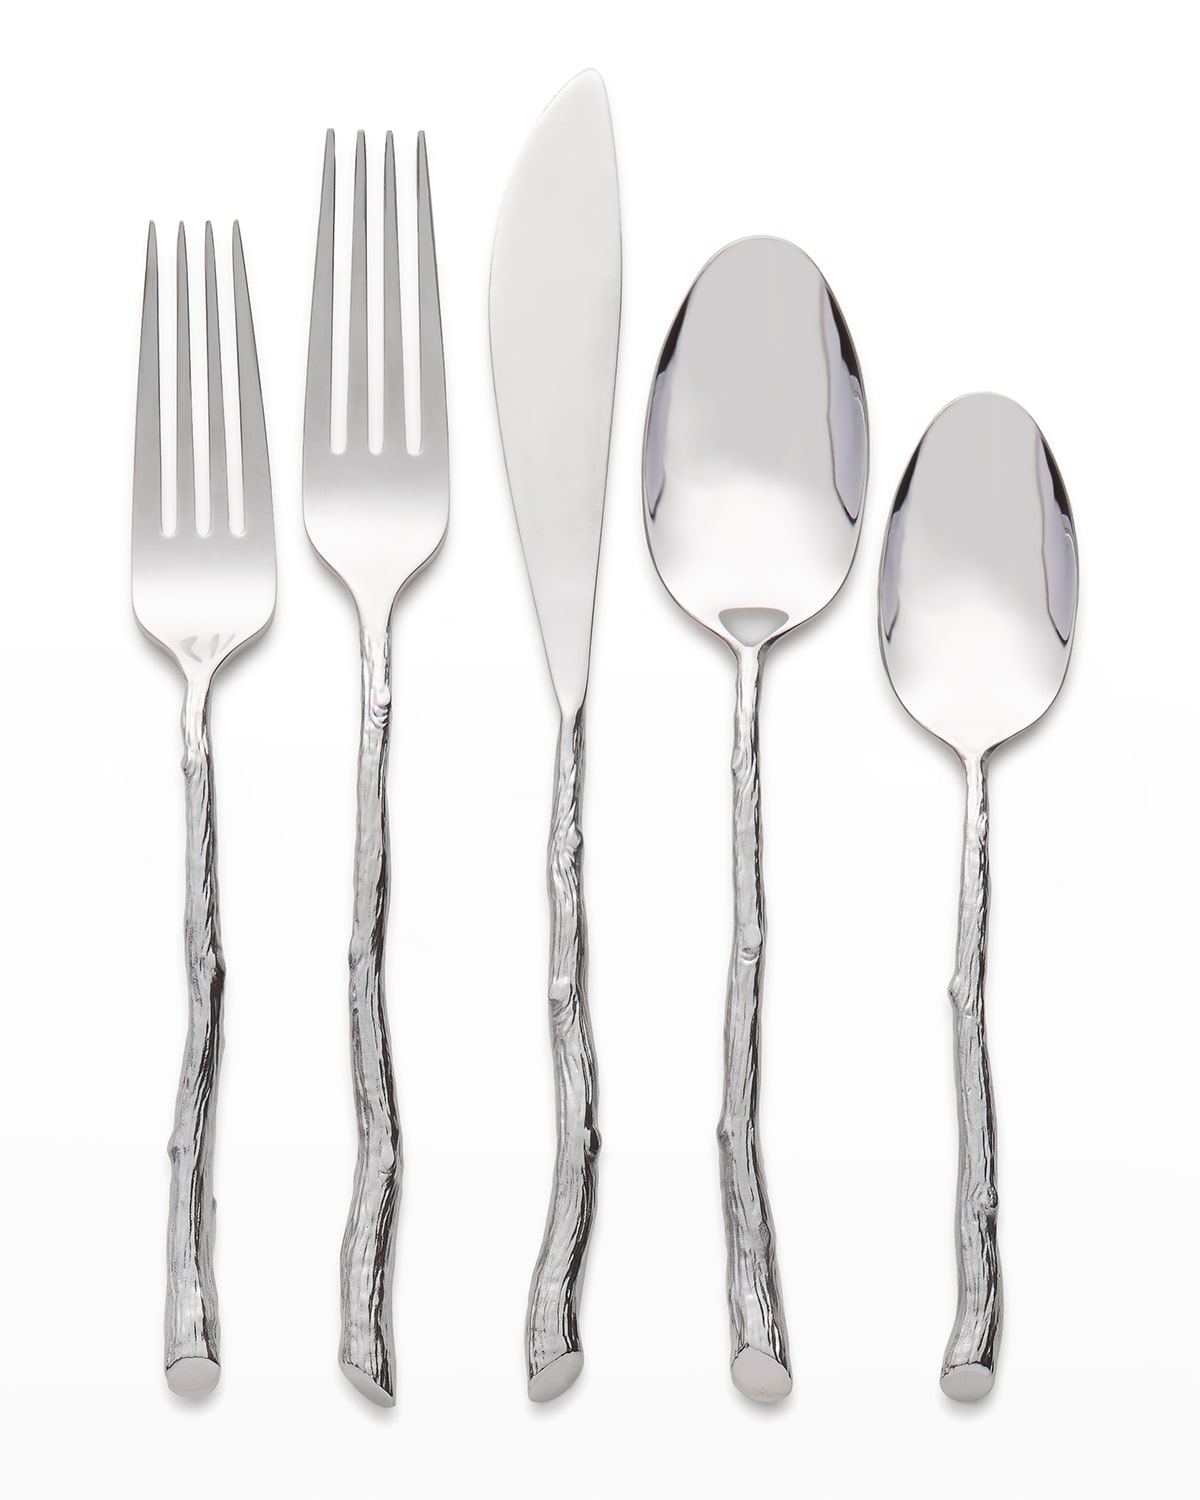 Michael Aram 5-piece Twig Flatware Place Setting In Stainless